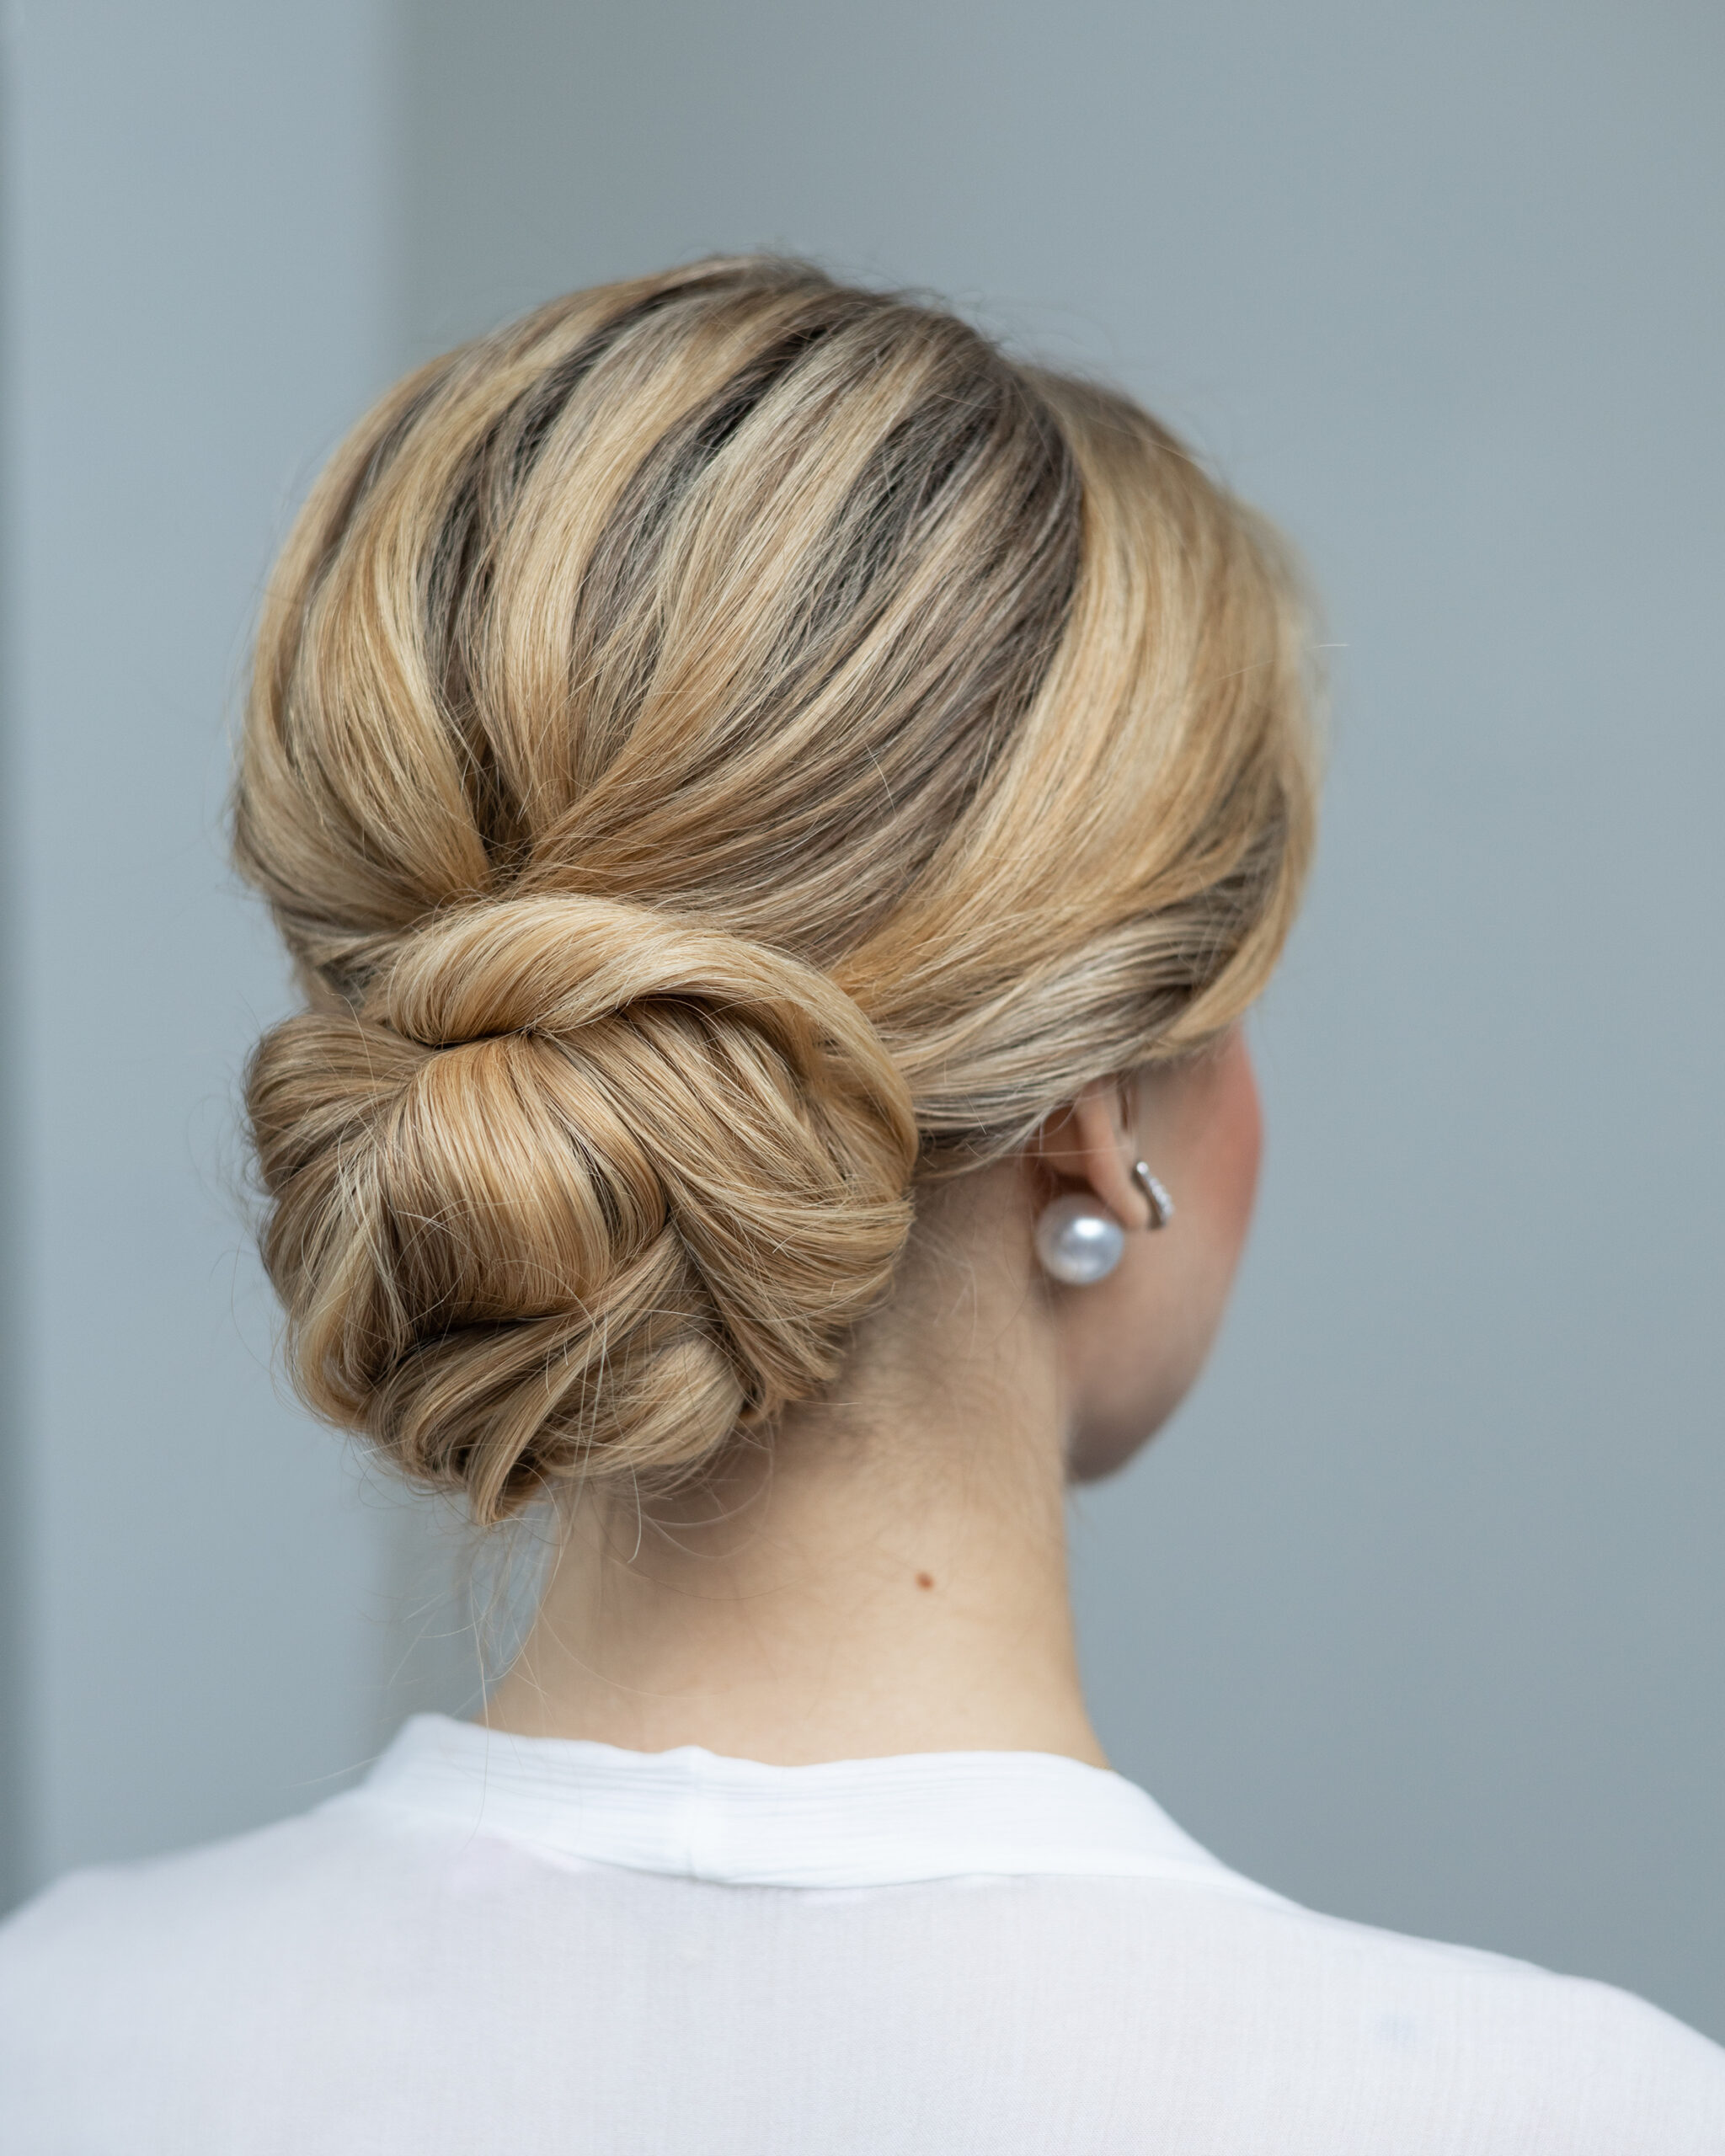 A sophisticated bridal hairstyle featuring a twisted low bun with blonde highlights, perfect for a chic Montreal wedding, paired with classic pearl earrings for a touch of grace